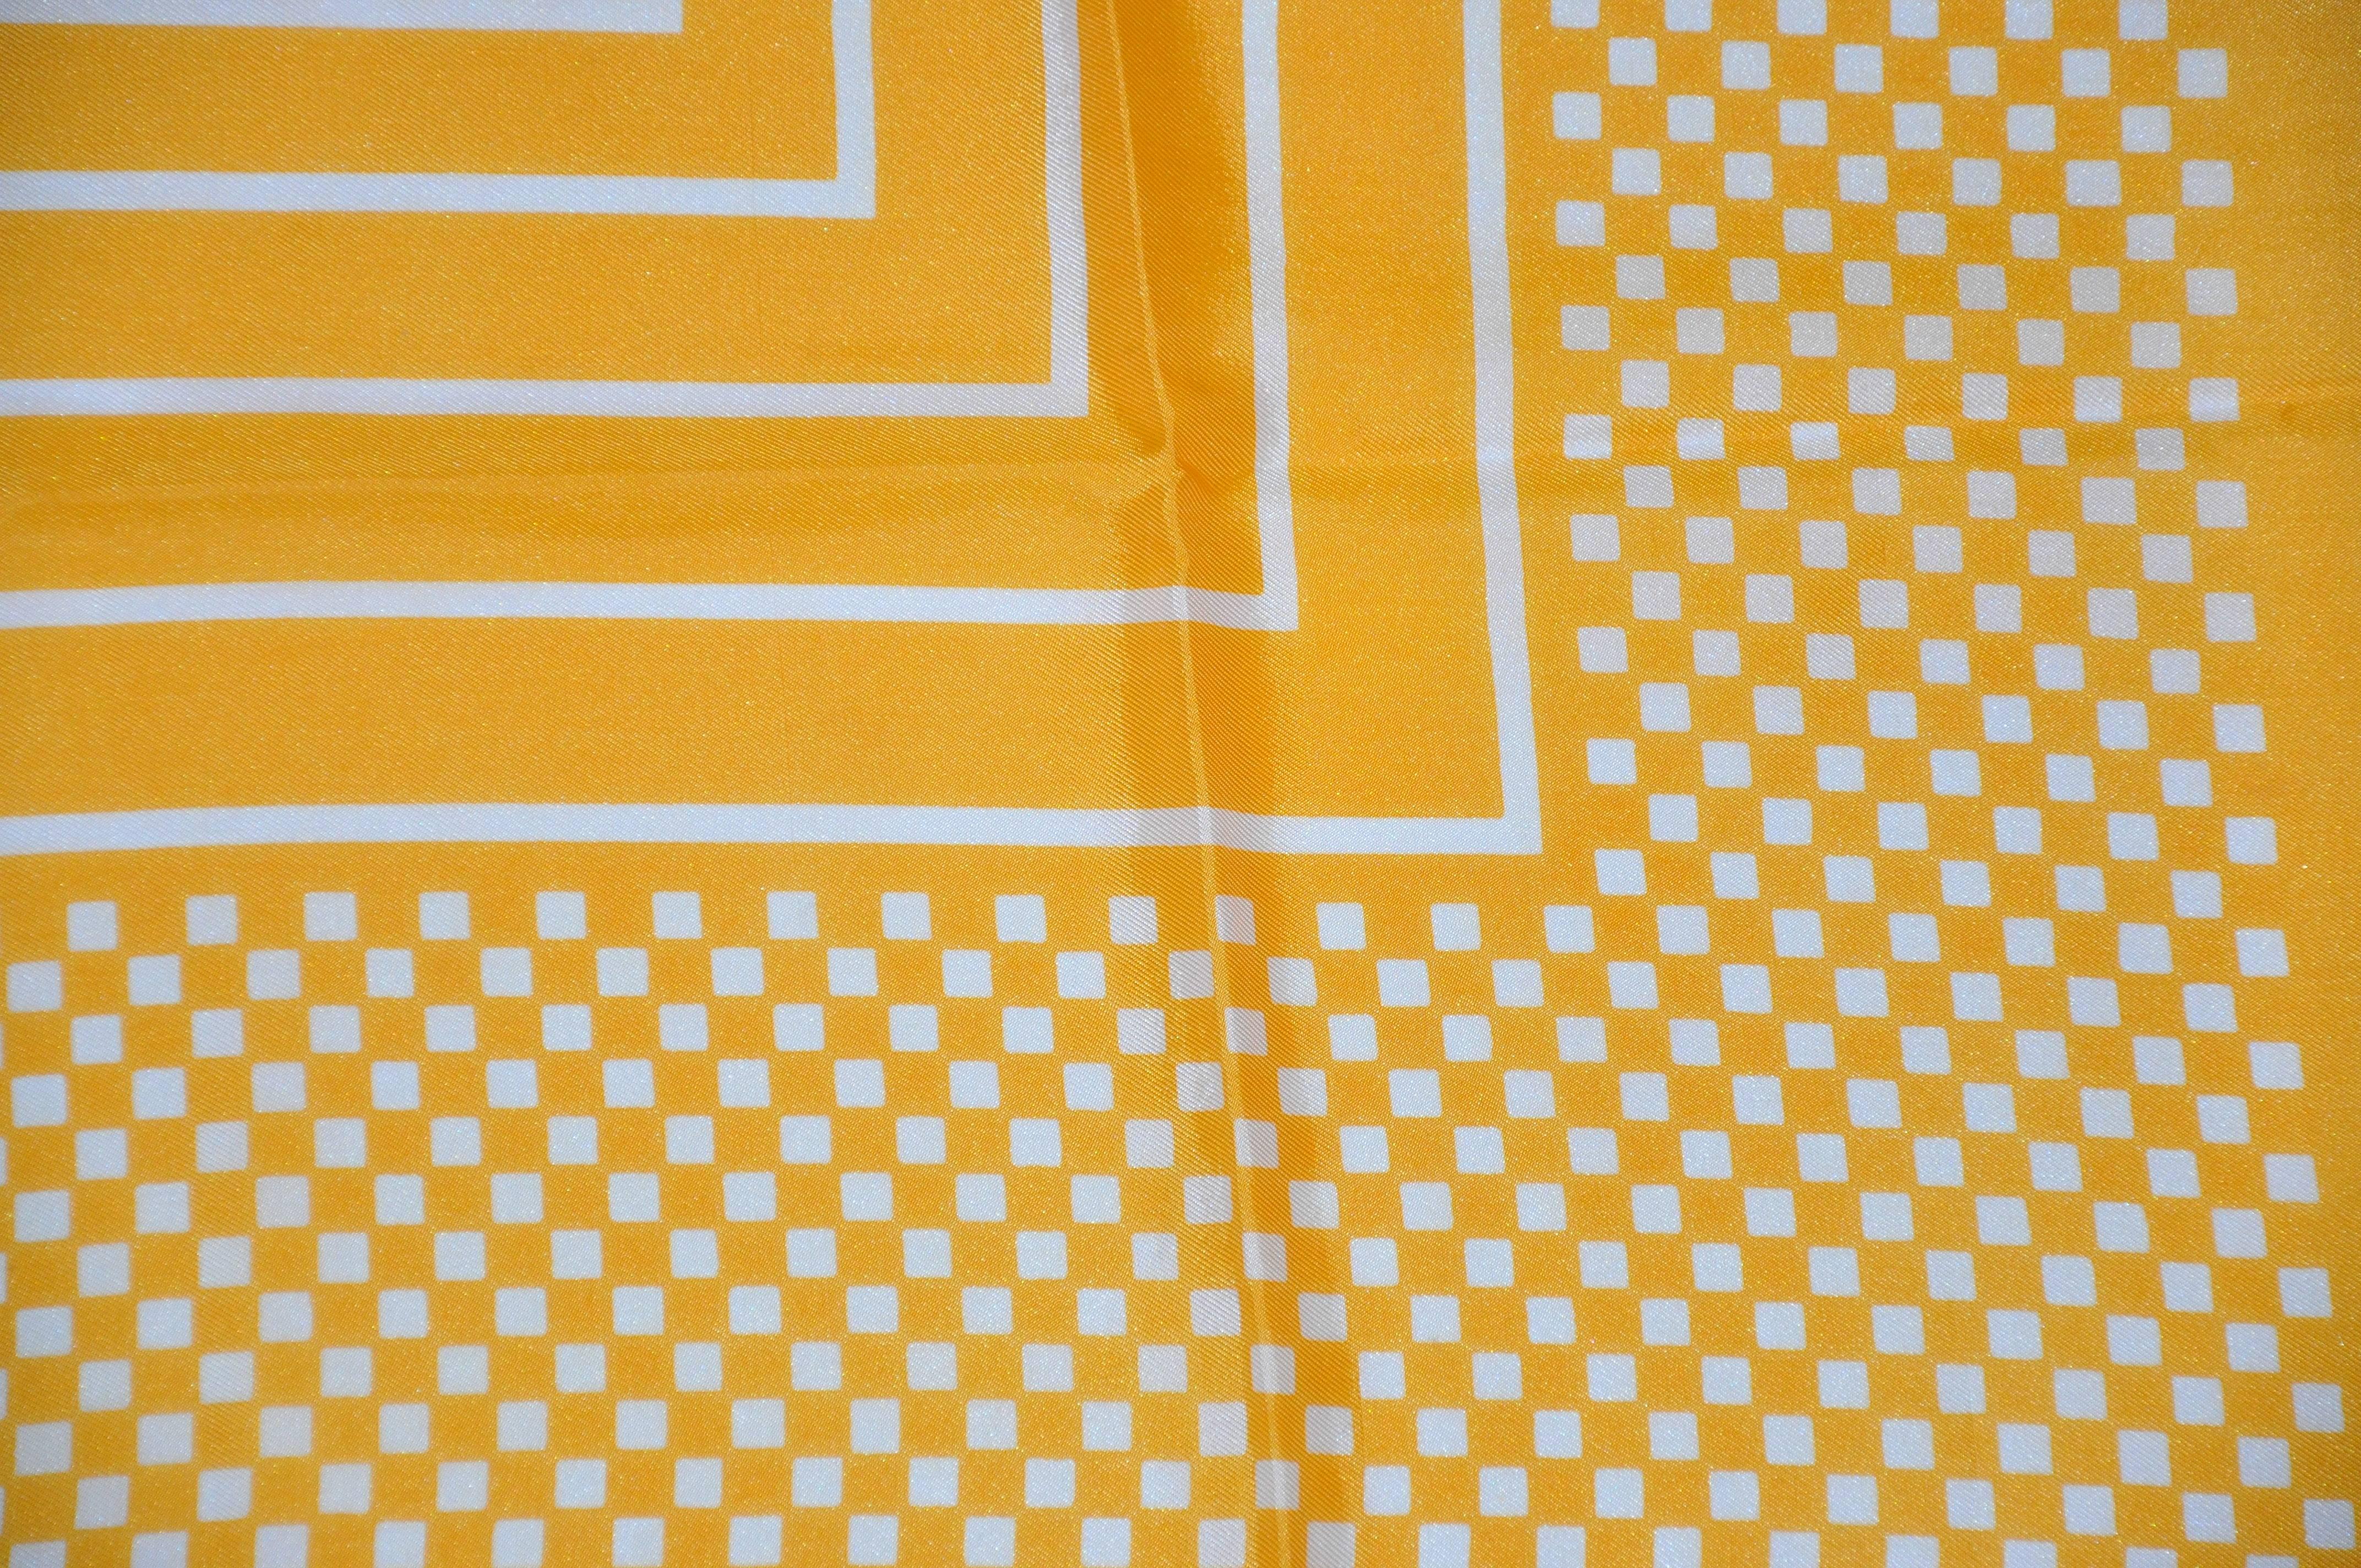 Bold yellow & white "Checkered & Stripes" scarf measures 26" x 26", finished with rolled edges. Made of acetate from Japan.